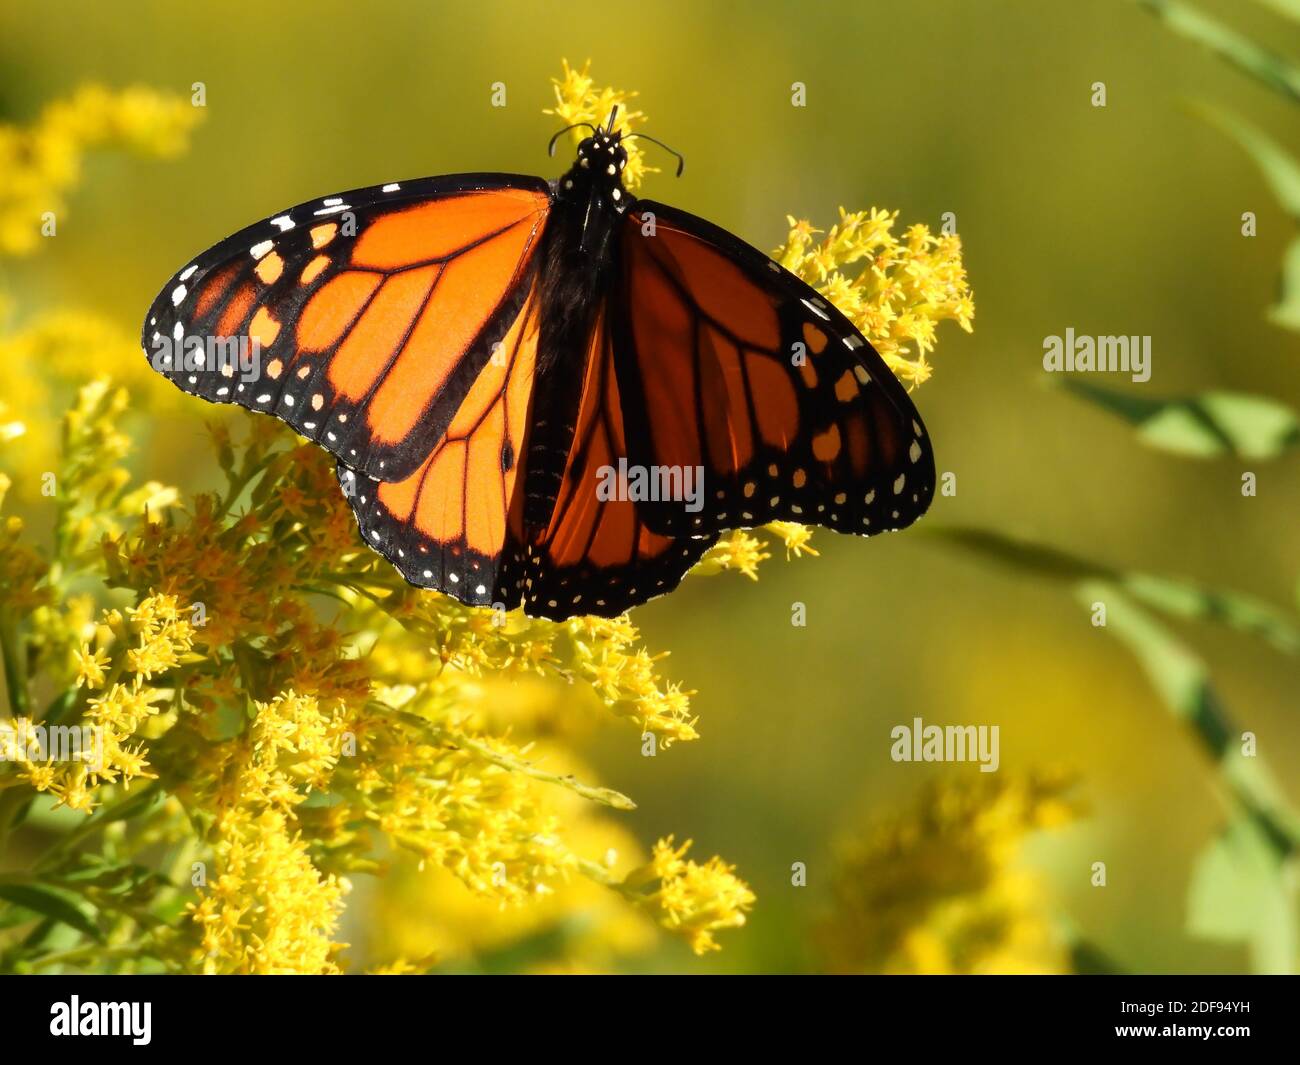 Monarch Butterfly Wings Spread and Eating a Yellow Wildflower Goldenrod Close Up, Macro, Orange and Black Wings Stock Photo